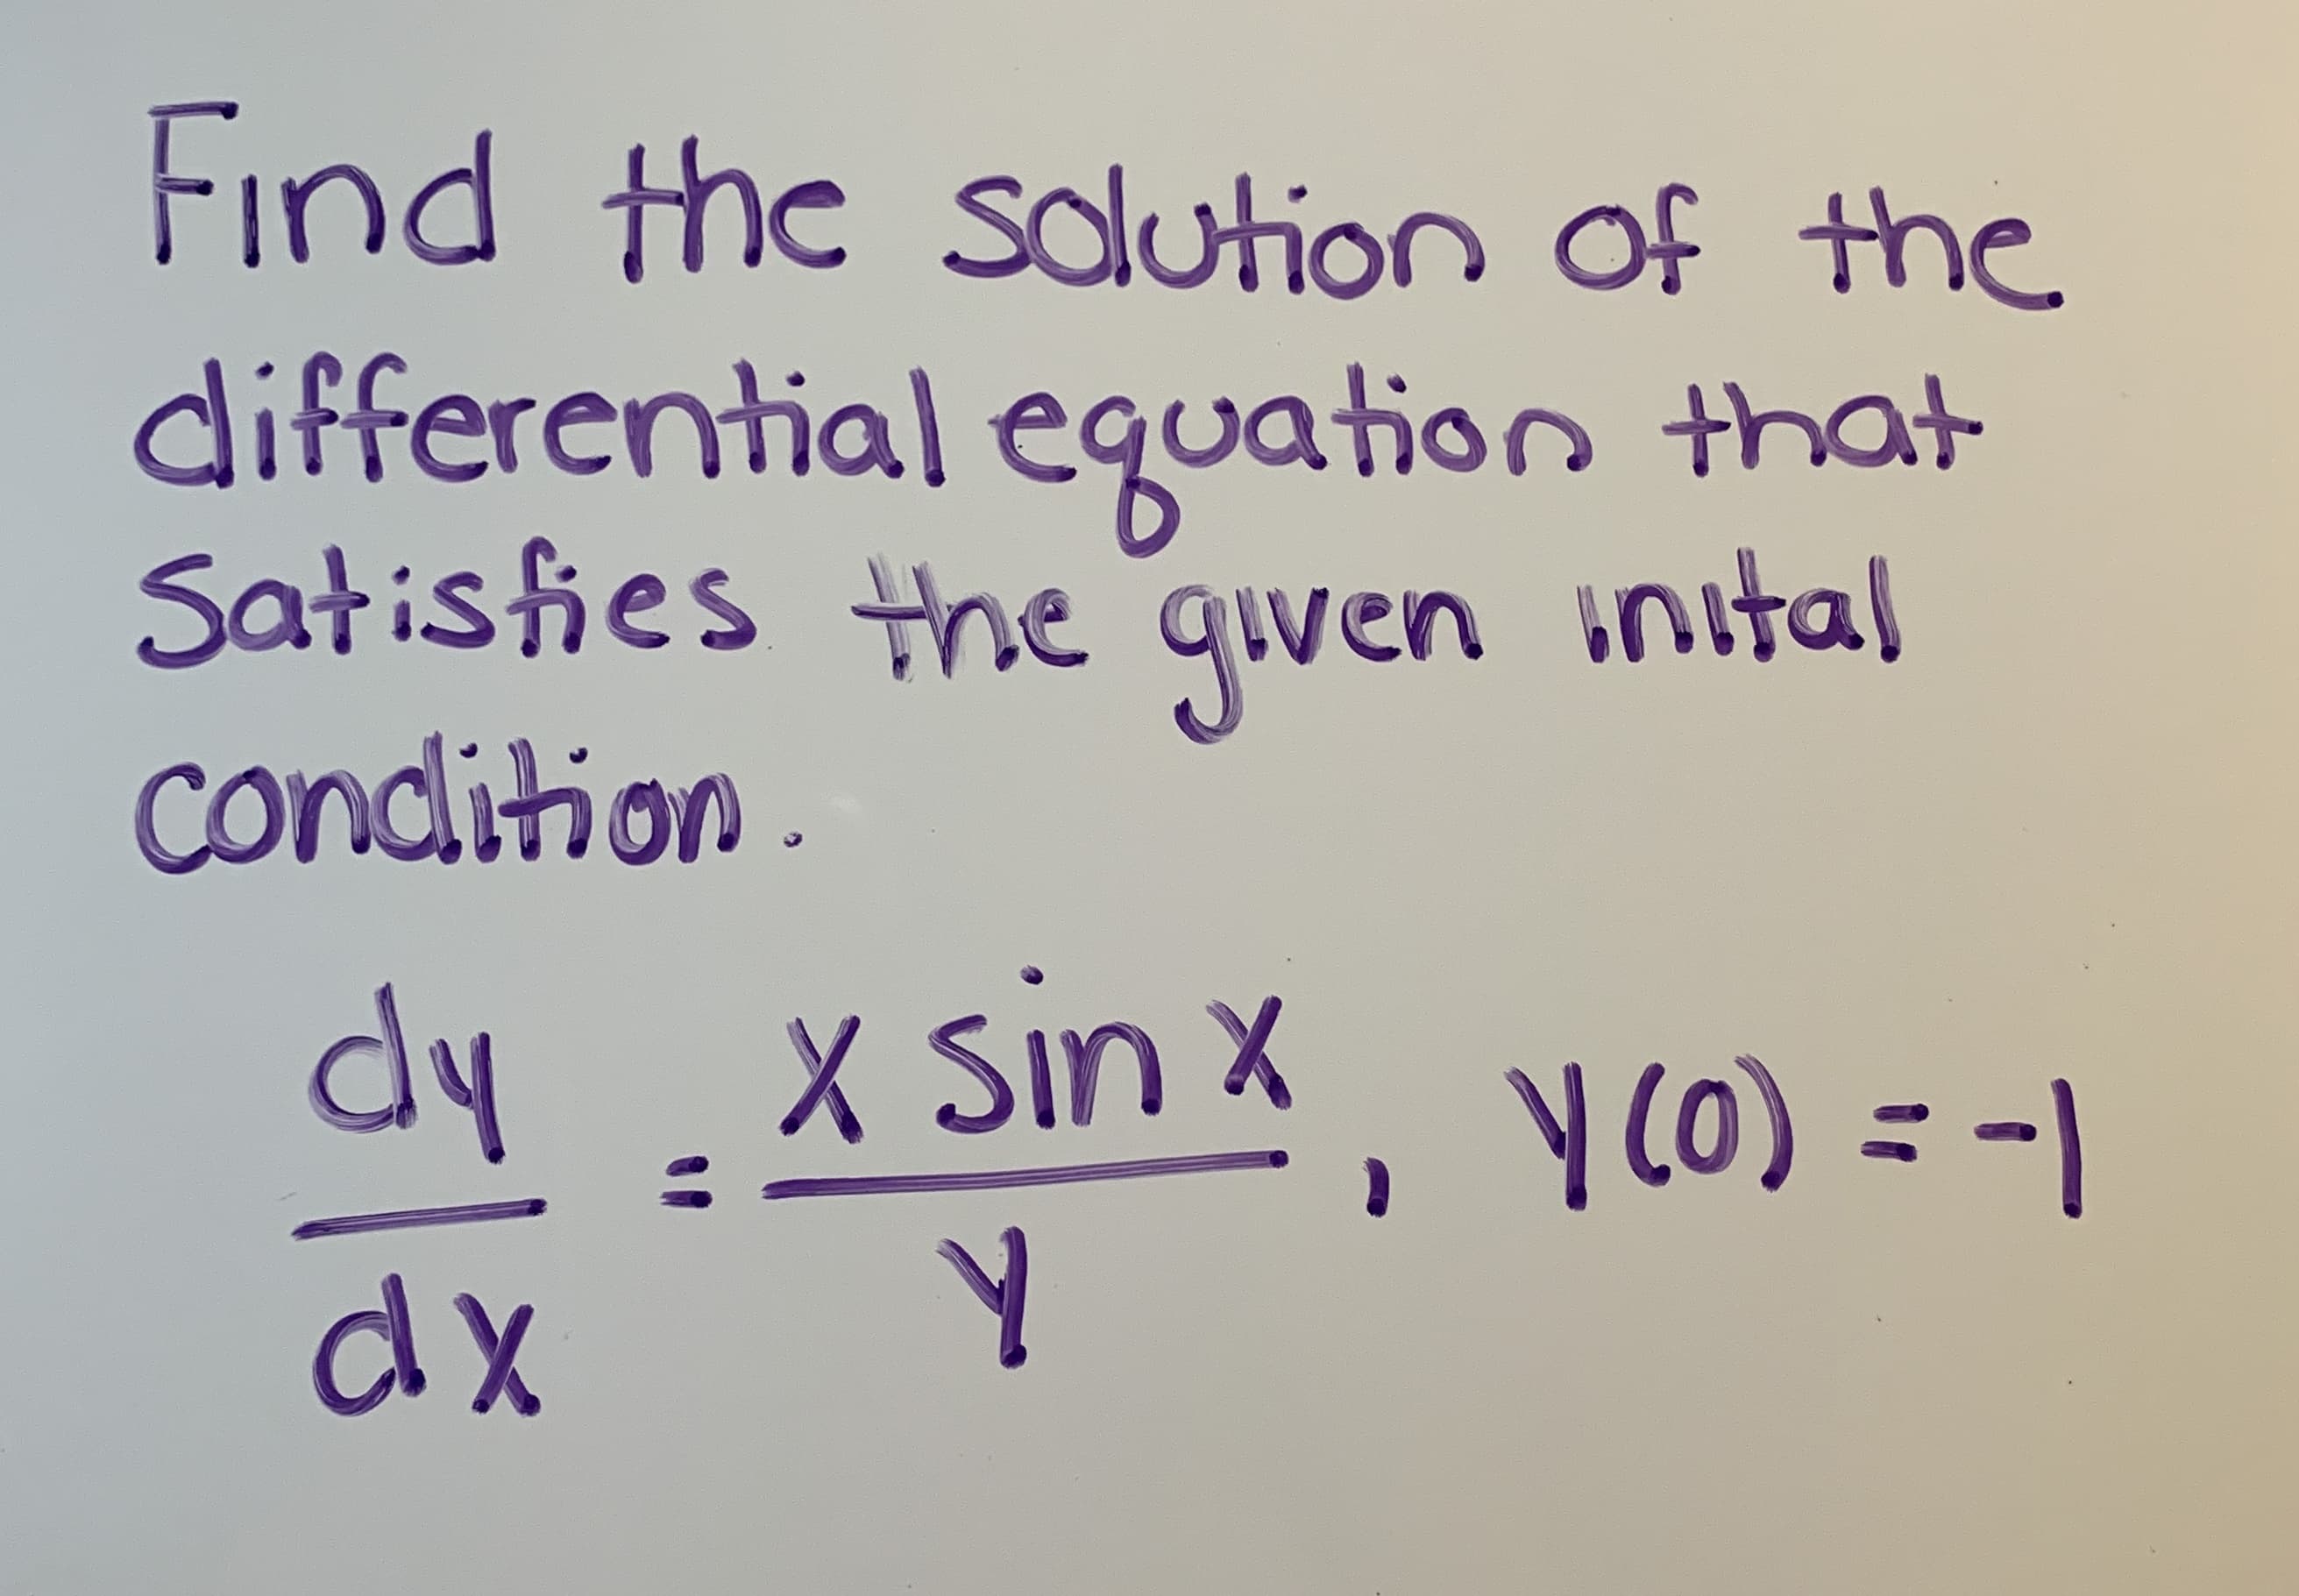 Find the sdution of the.
differential equation that
Satisies the qven intal
condition
